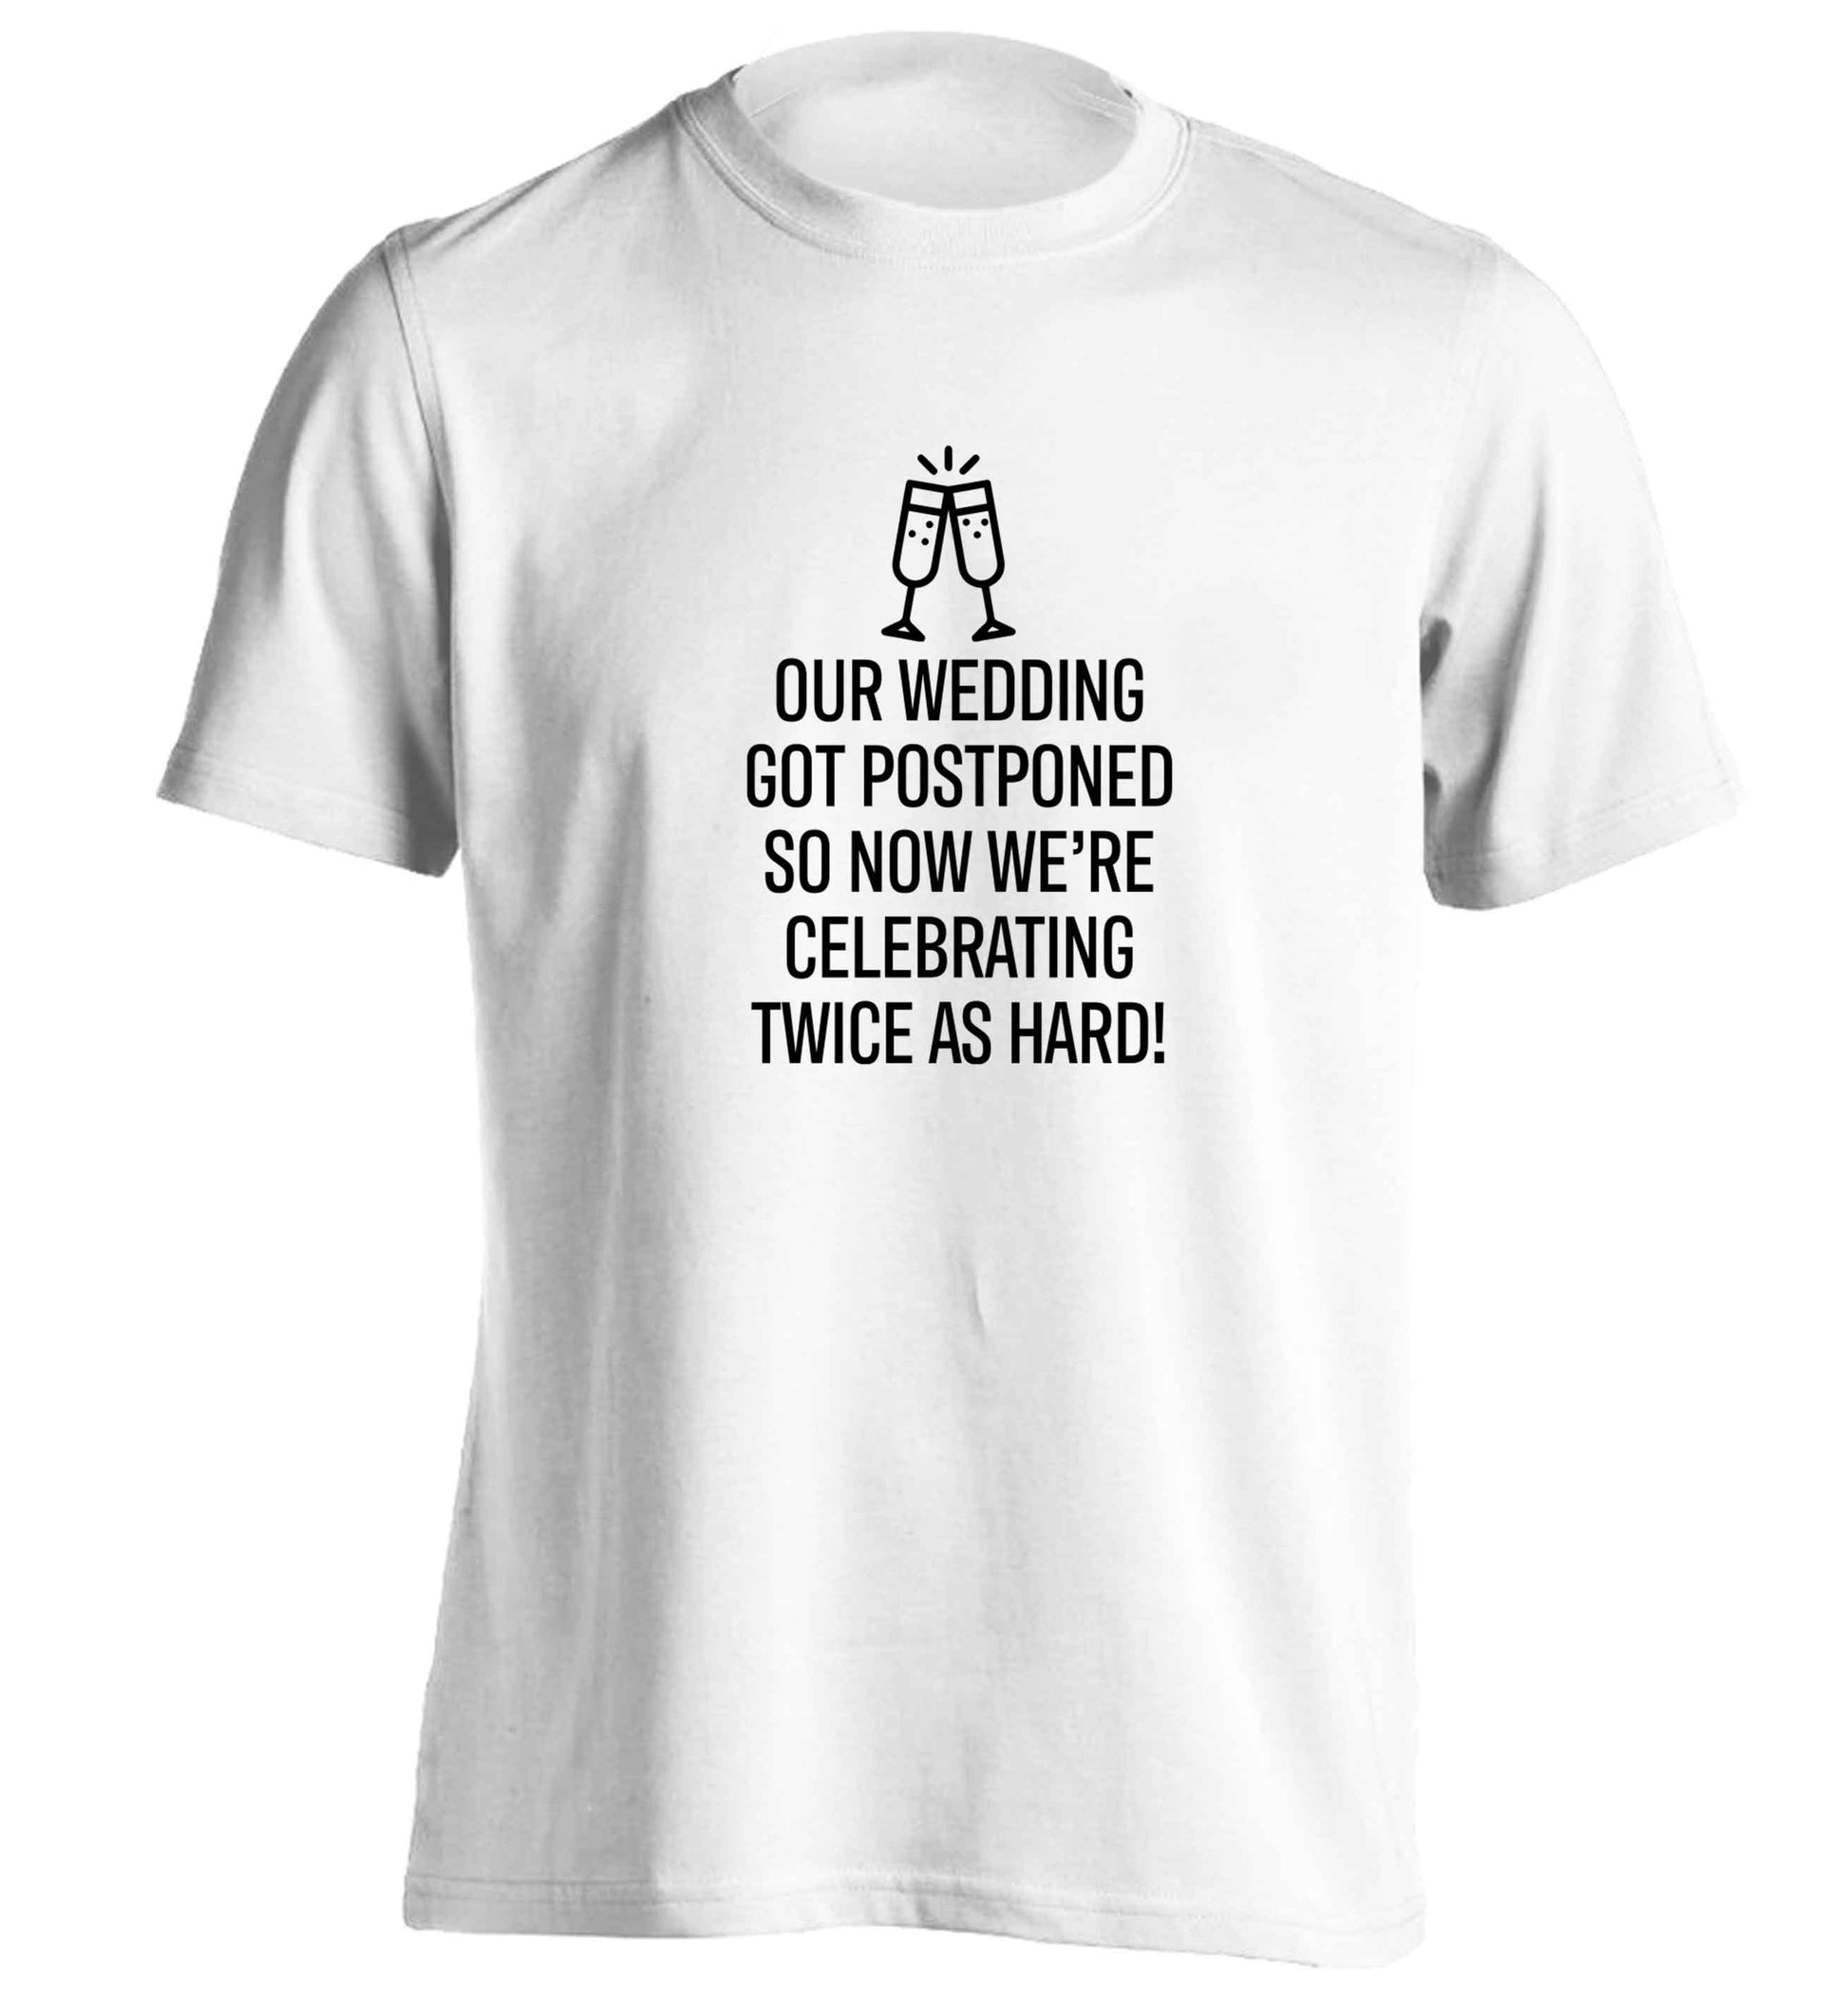 Postponed wedding? Sounds like an excuse to party twice as hard!  adults unisex white Tshirt 2XL